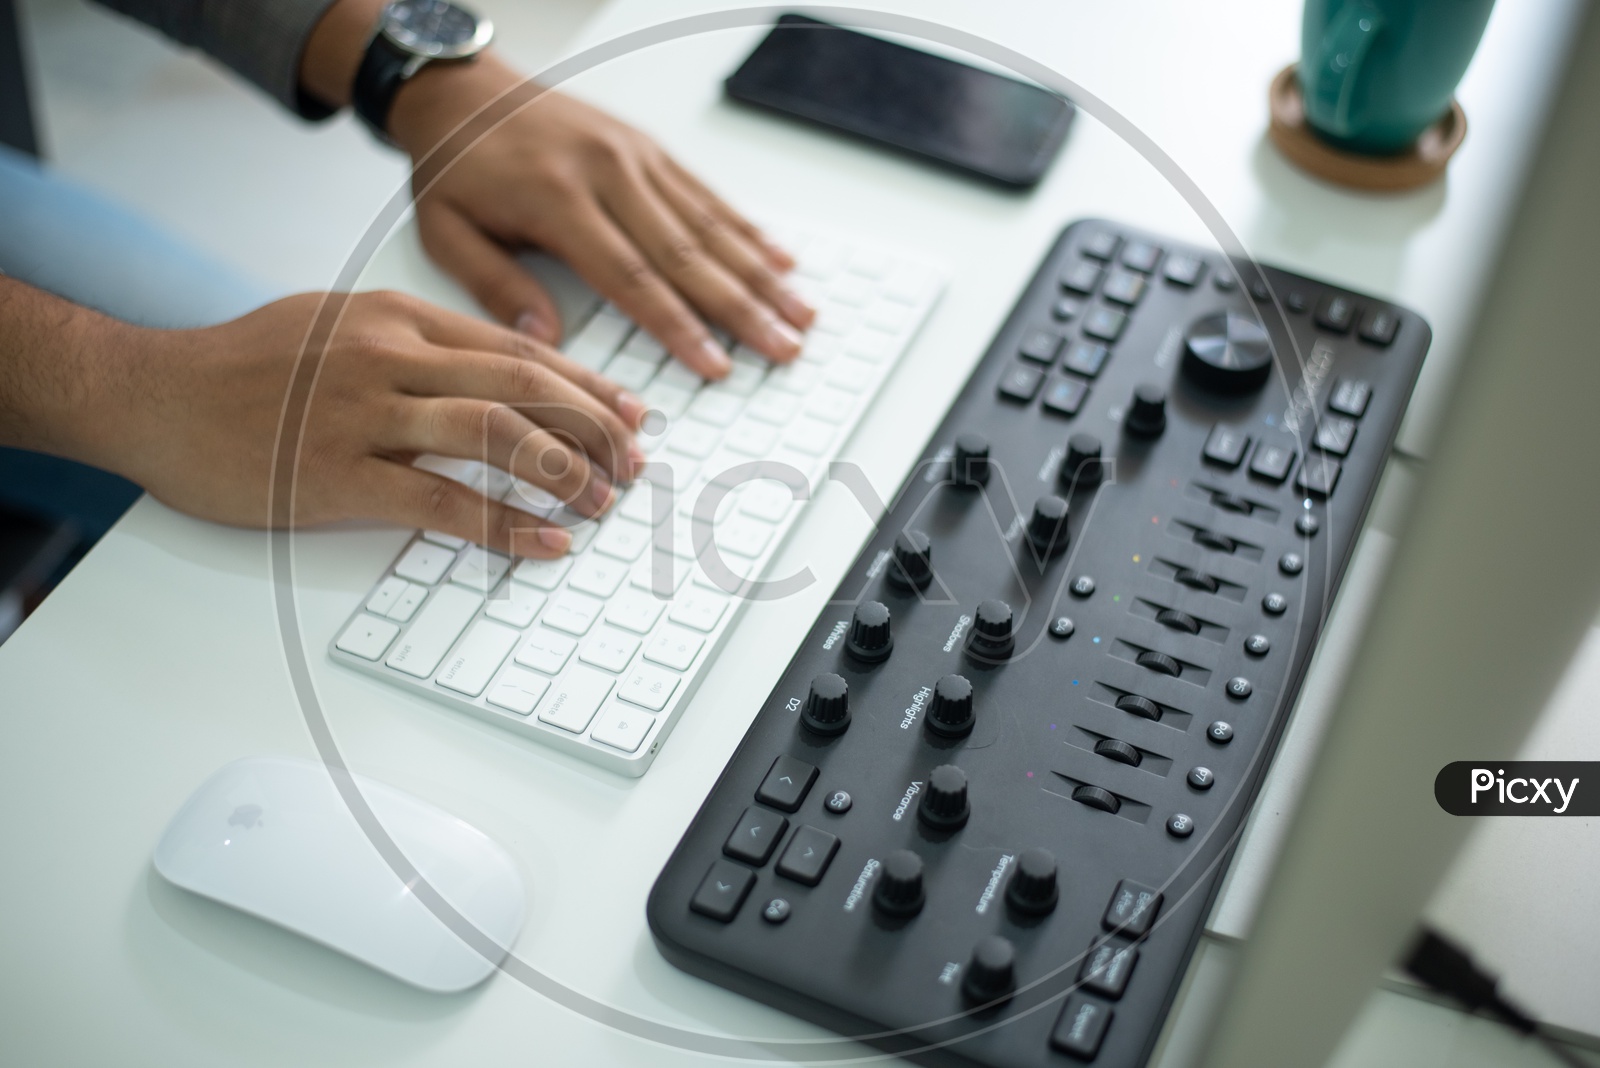 Closeup Of  Businessman Hands or Fingers  Working On Computer Keyboard at Office Desk